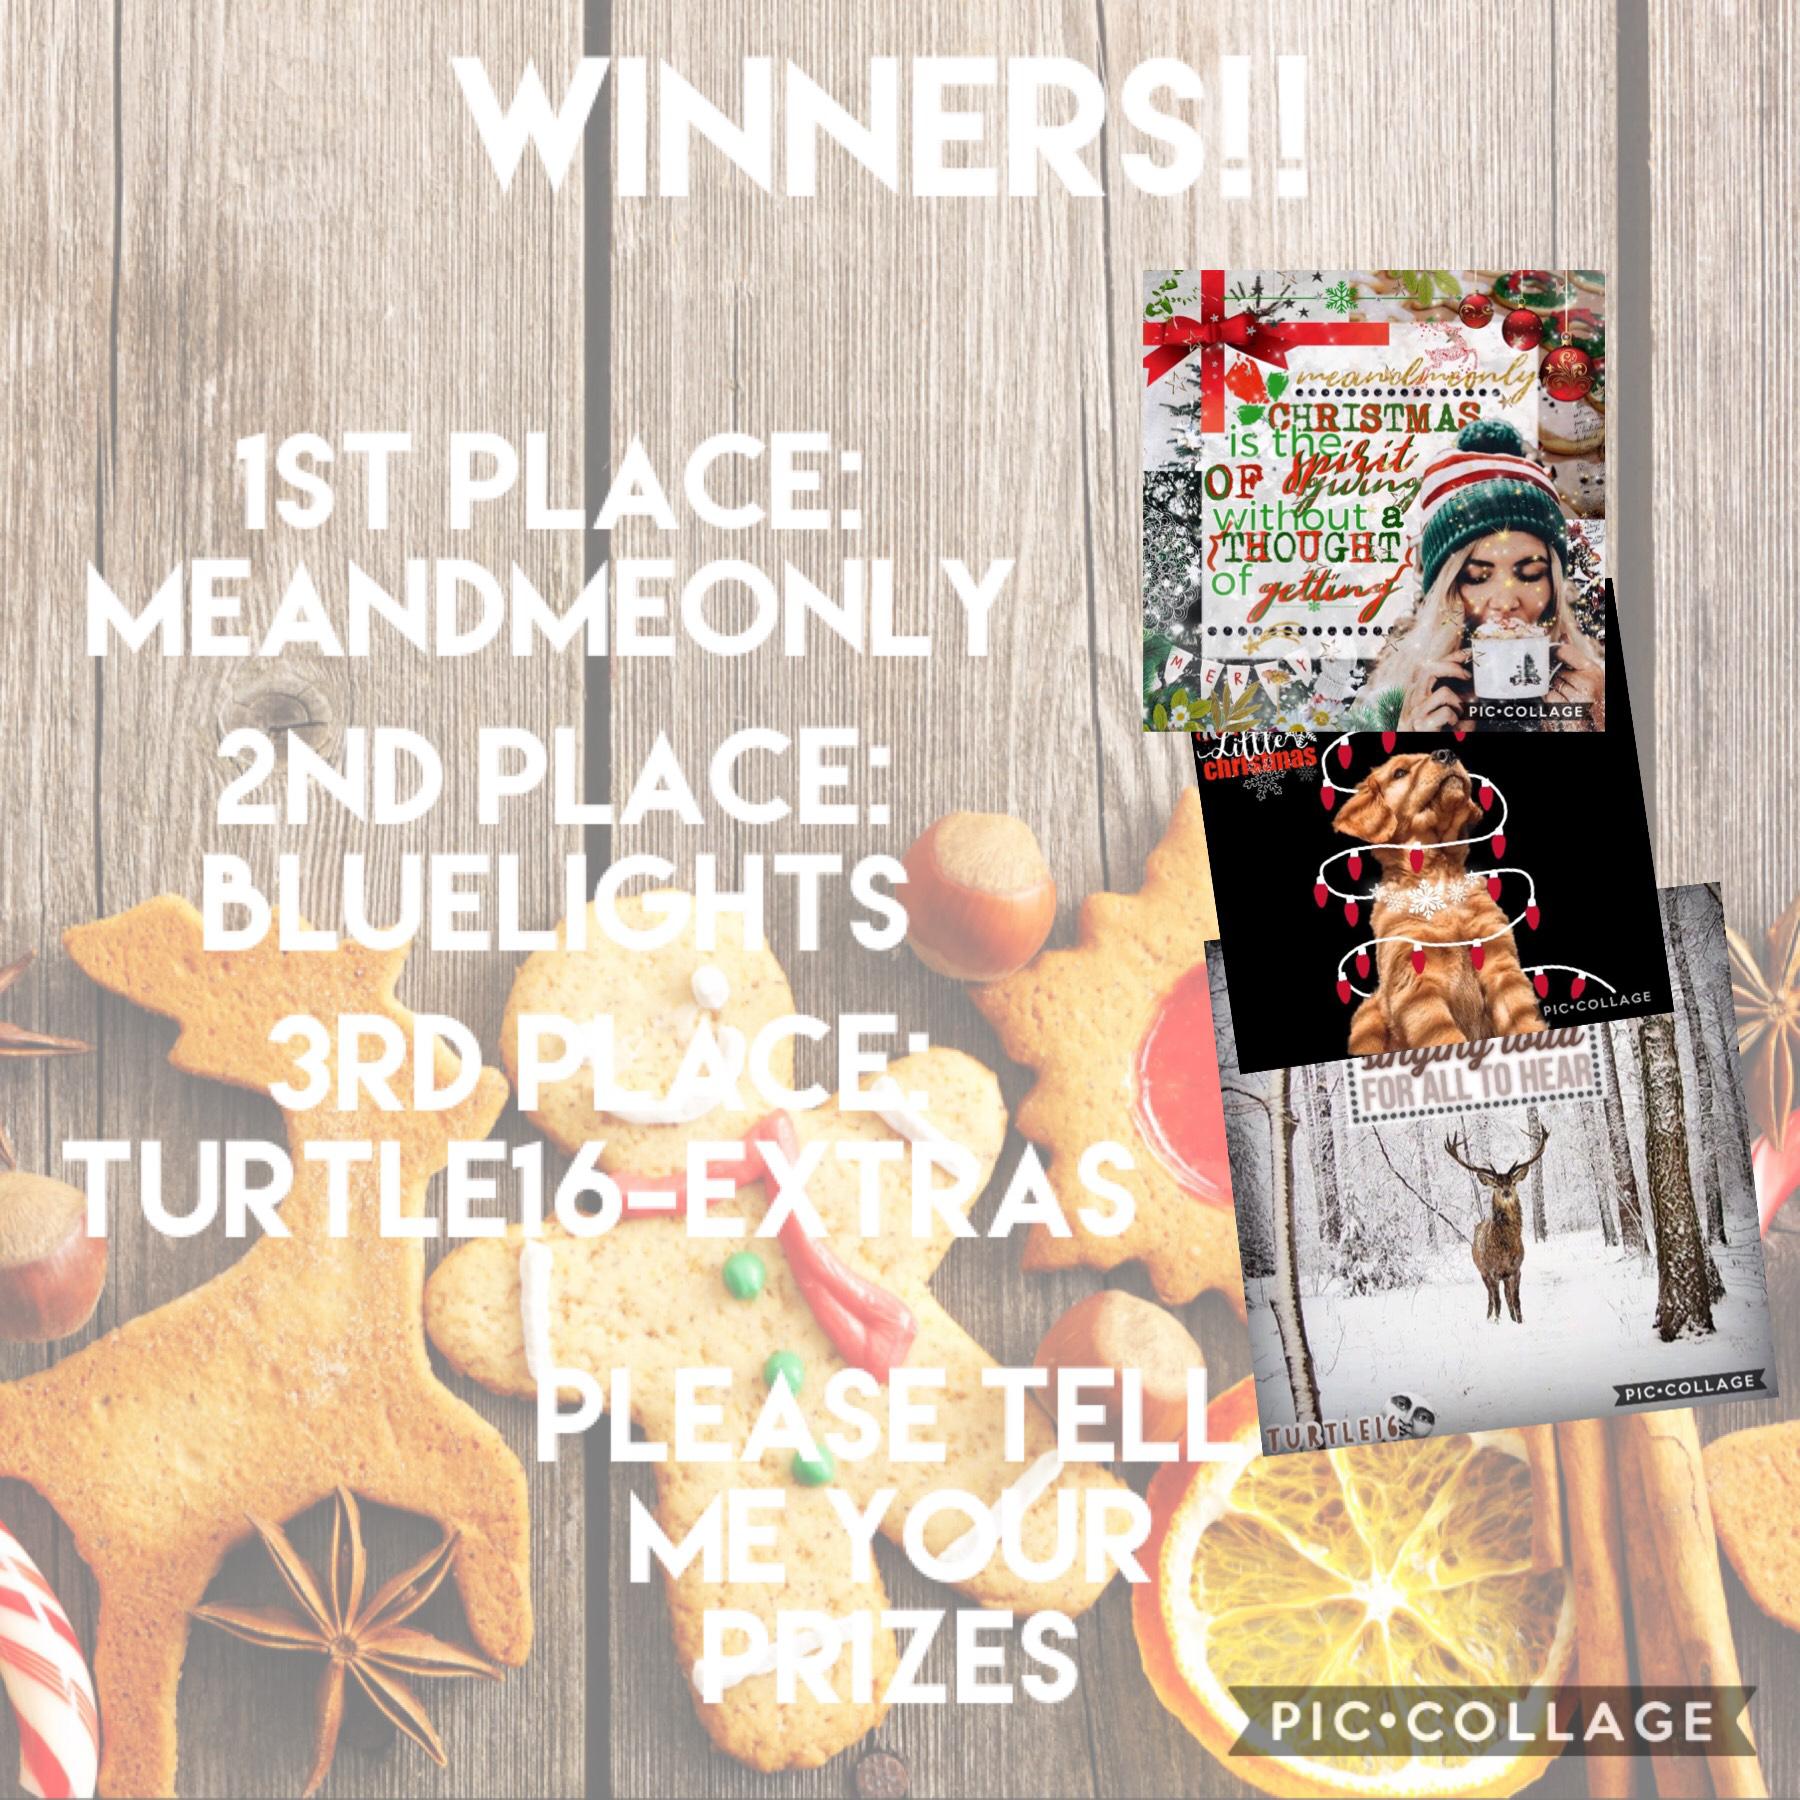 Congratulations to everyone who entered!! This was a tough contest to judge. Honestly. You guys are all so talented!!! Merry Christmas!🎄 